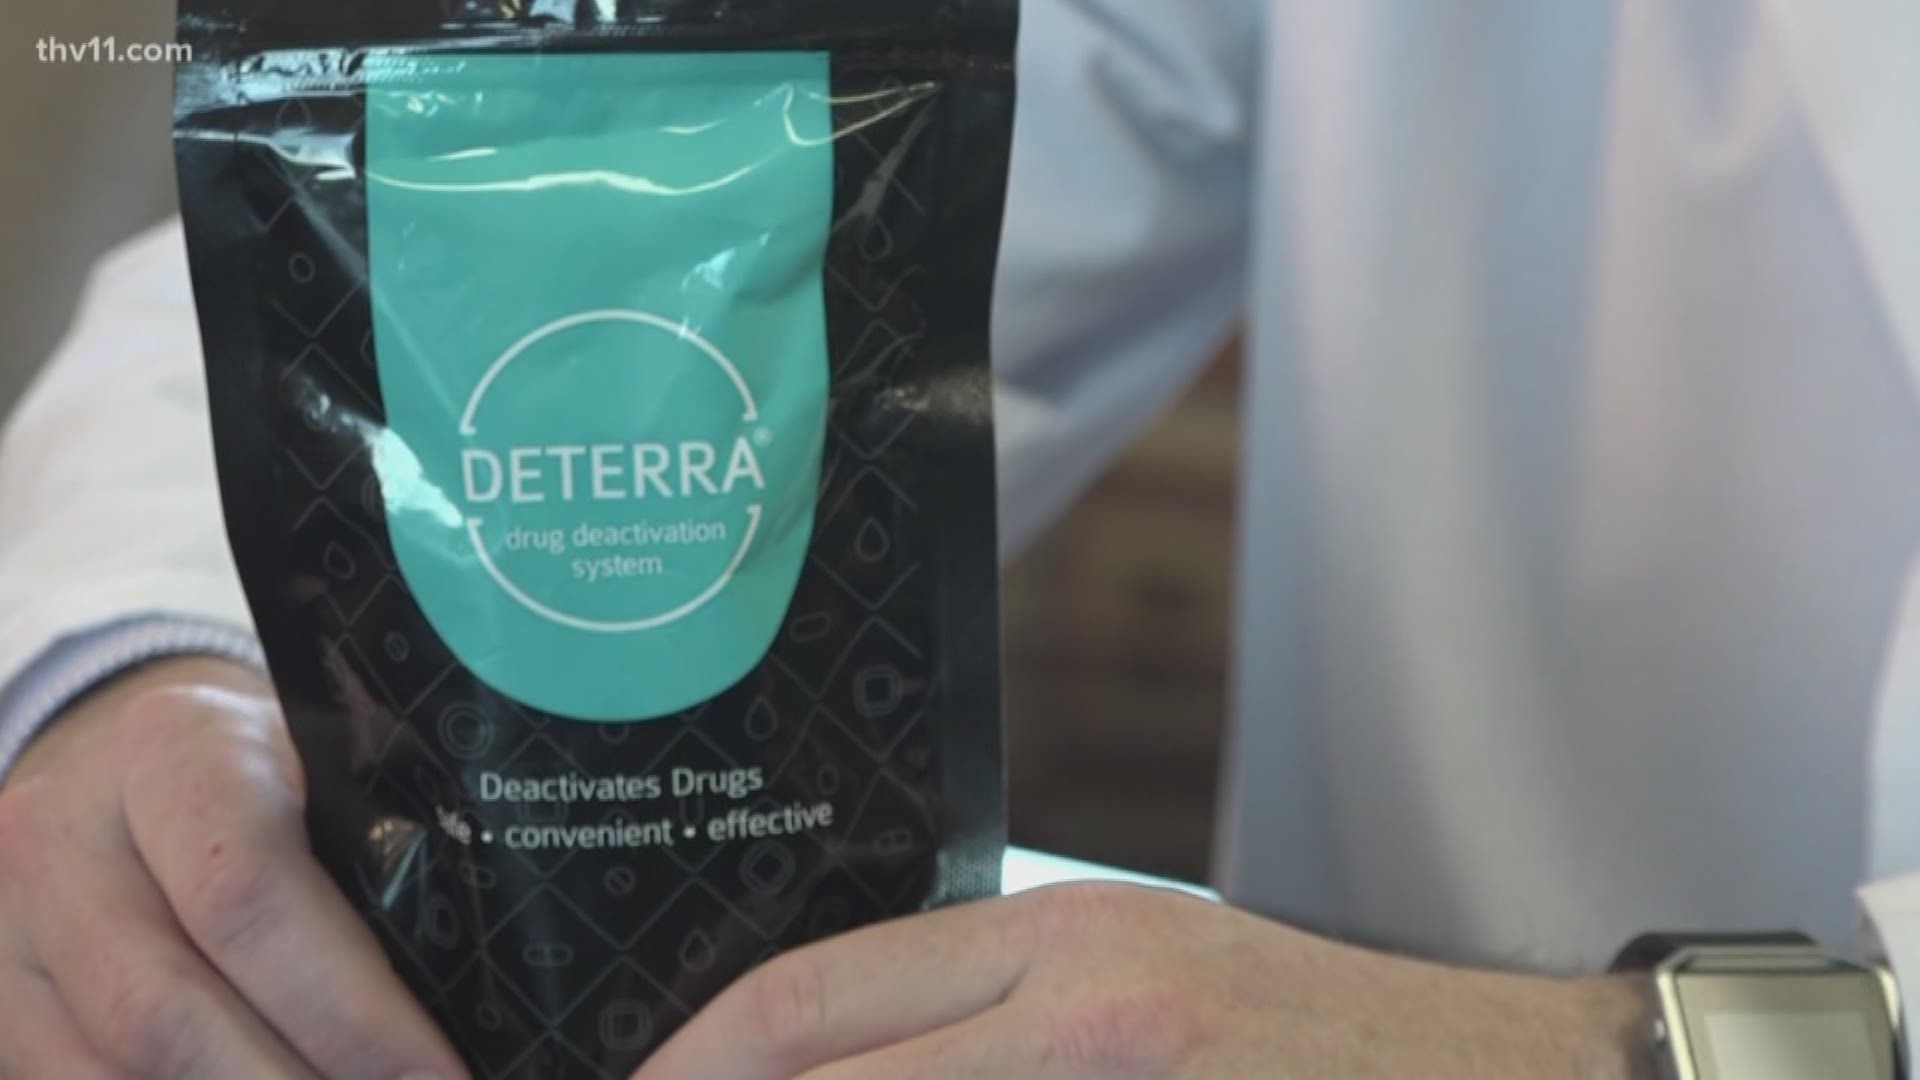 There's a new way to get rid of your unwanted medications from the comfort of your own home. It's called the "Deterra Drug Deactivation System."